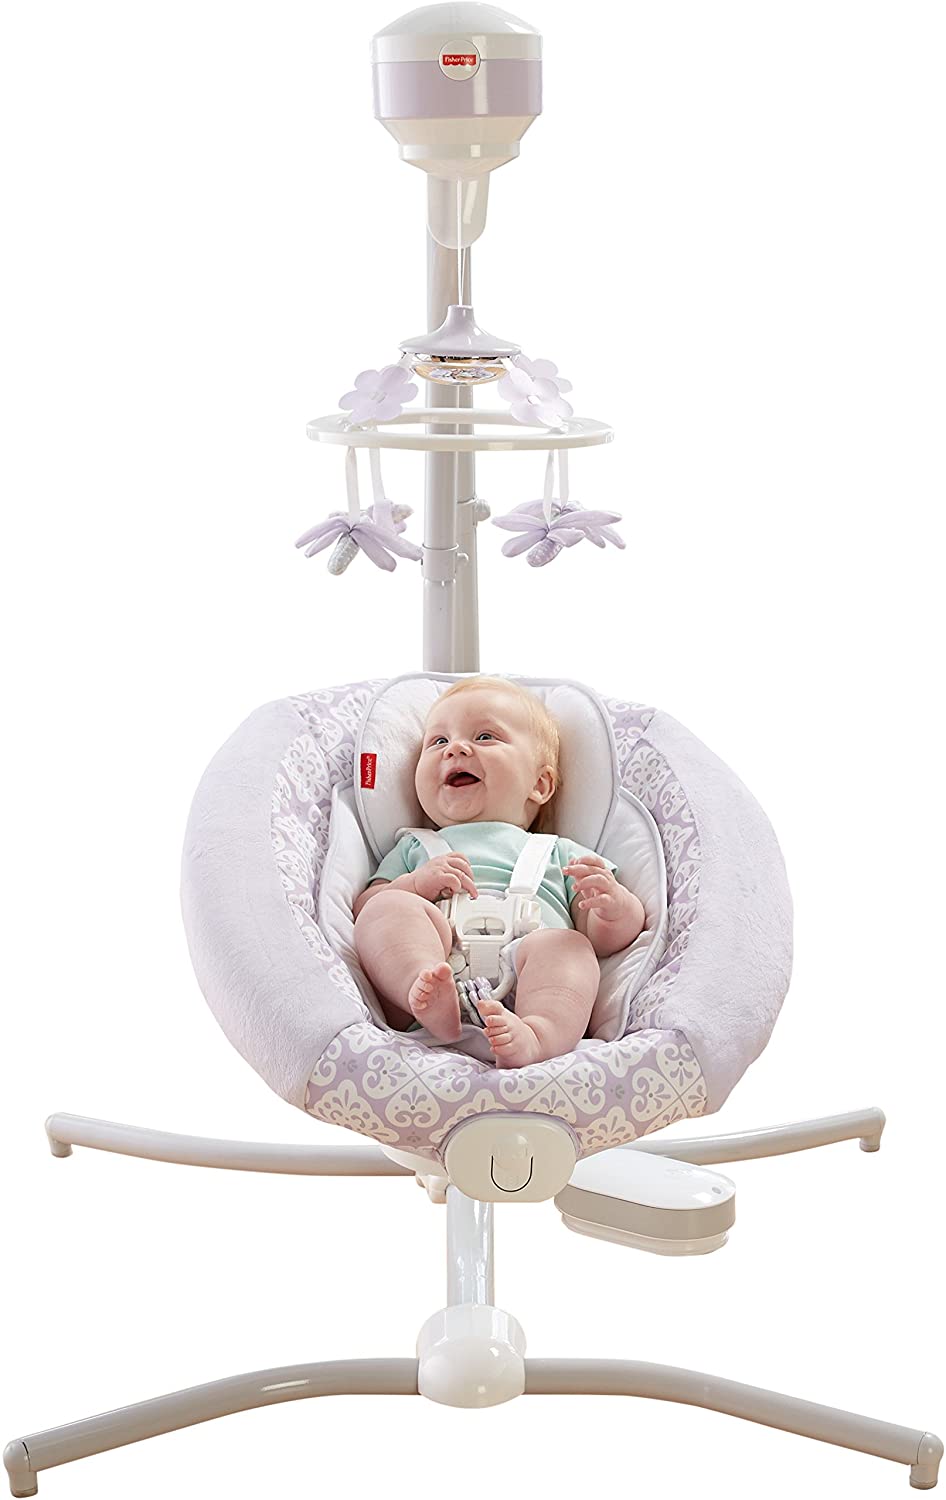 9 Best Fisher-Price Baby Swings 2022 - Review & Buying Guide 6